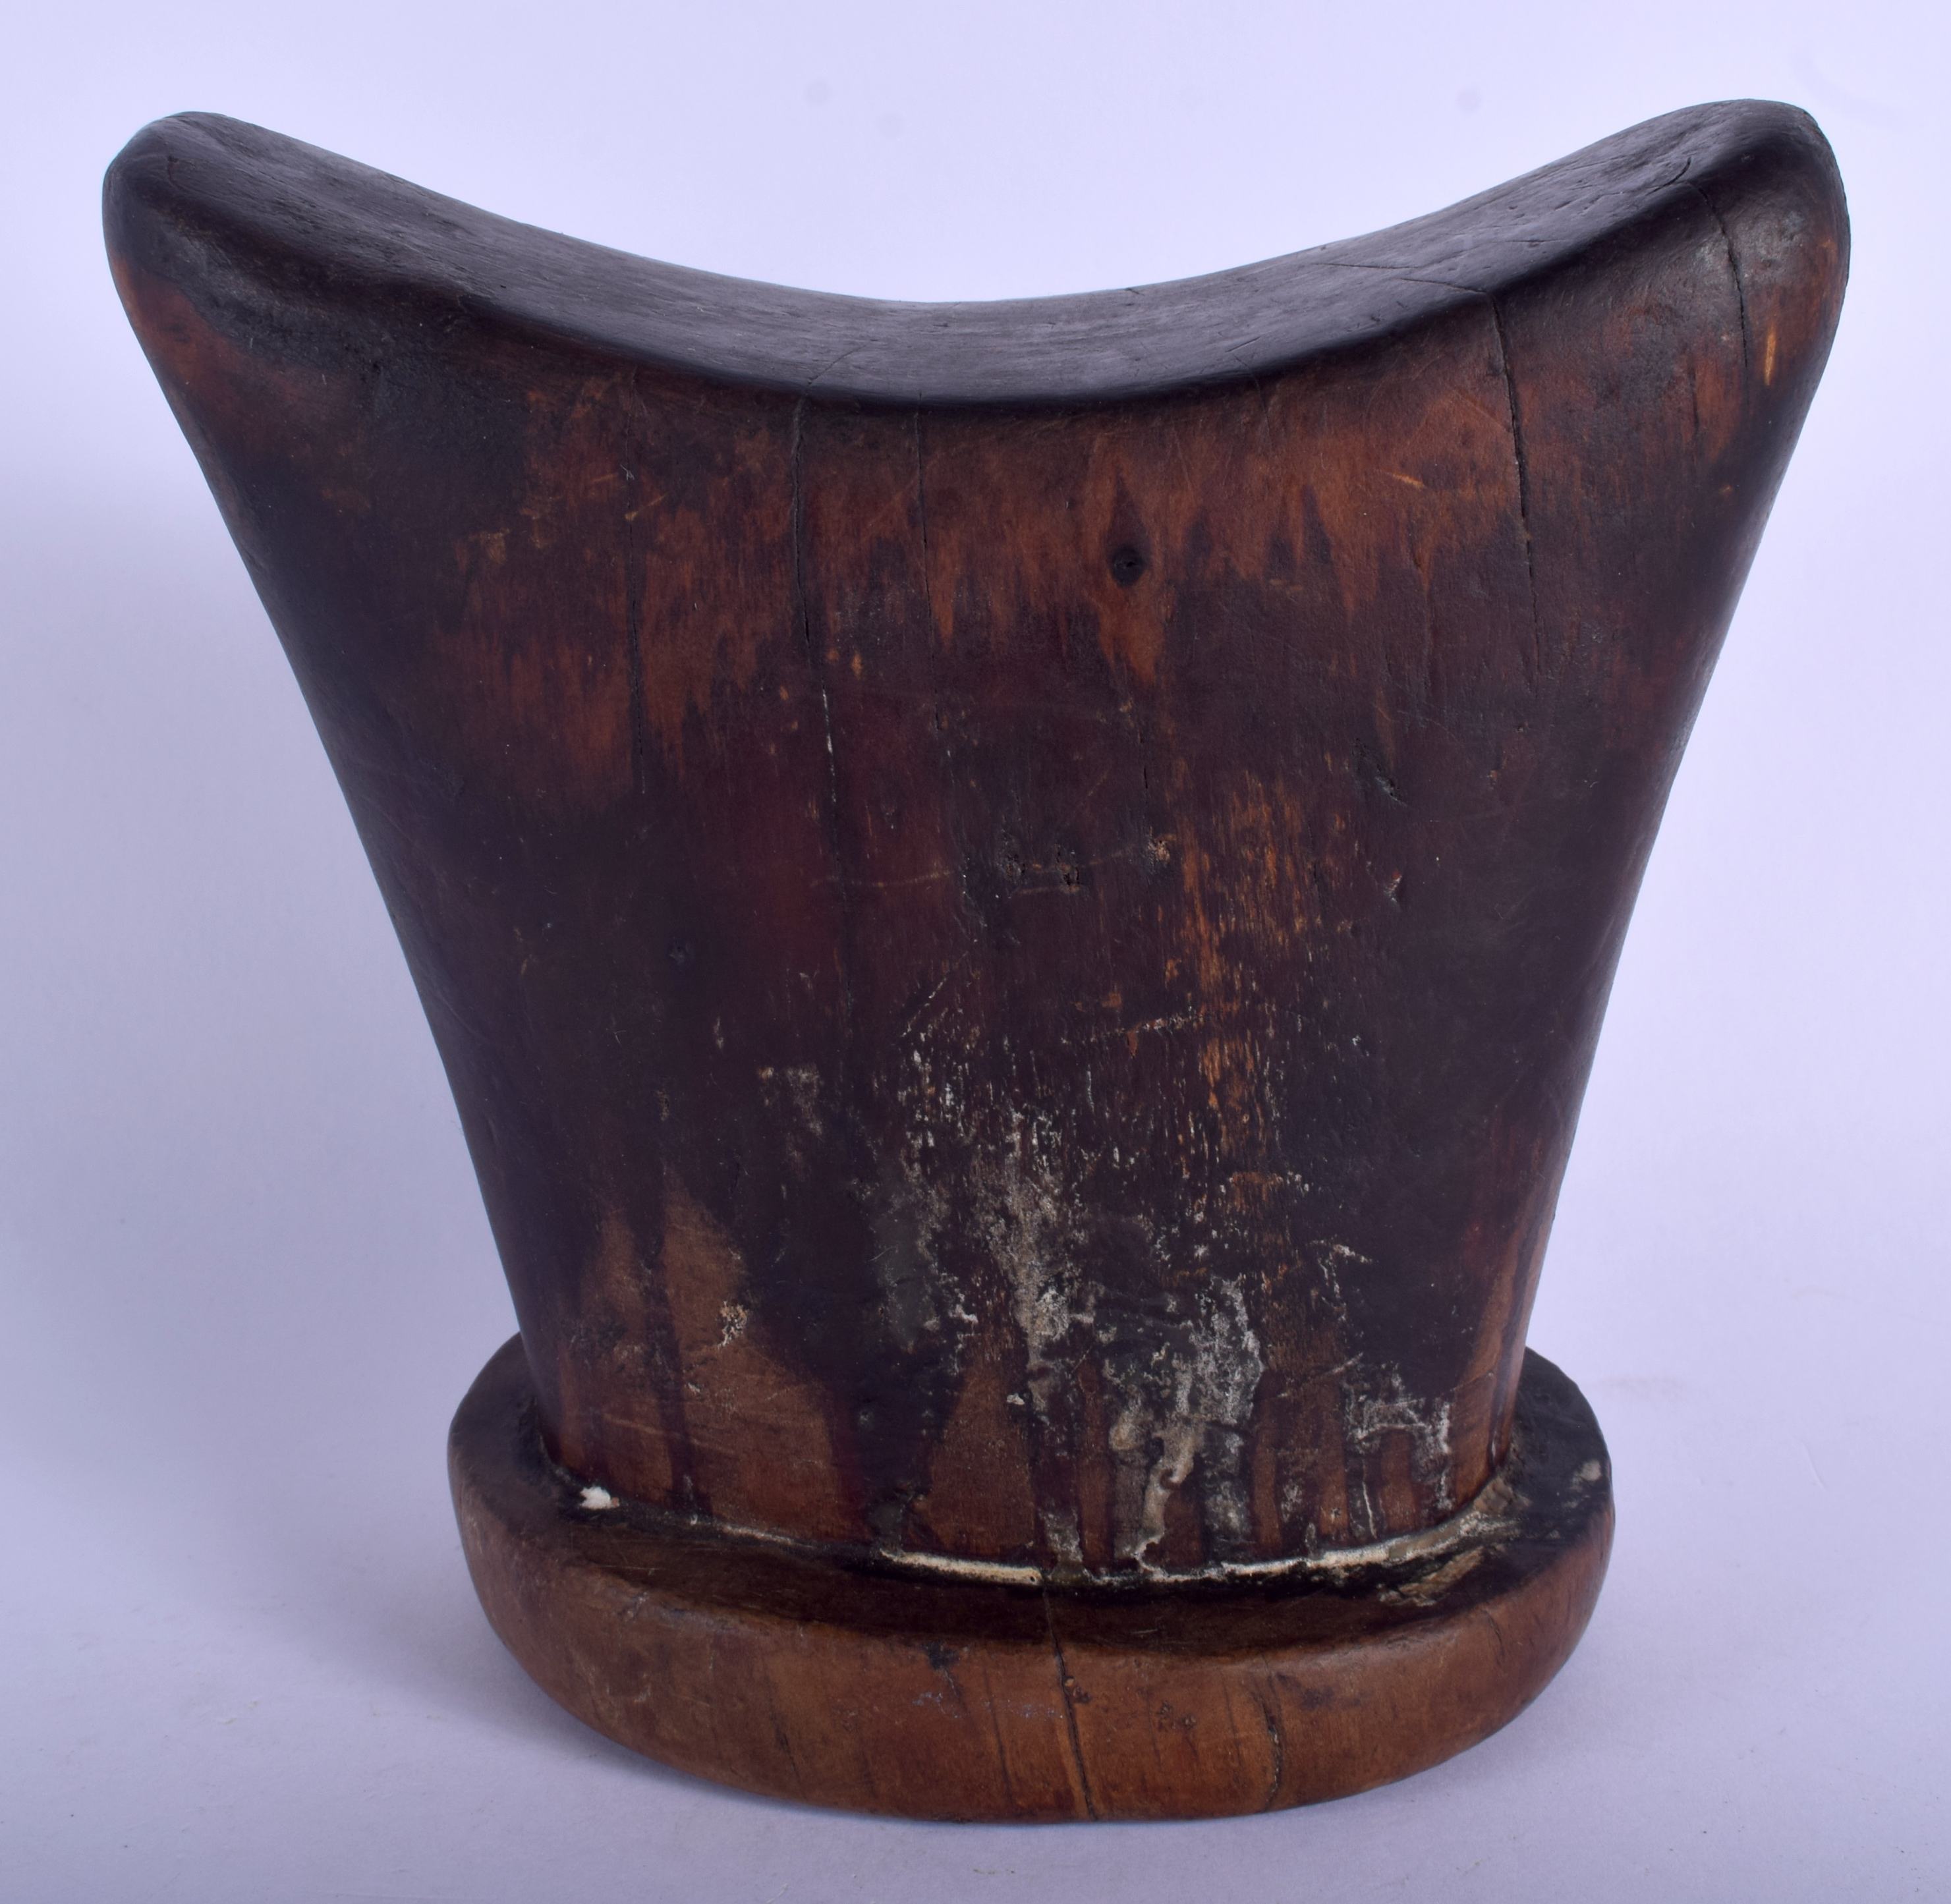 A LOVELY EARLY 20TH CENTURY ETHIOPIAN SIDAMO TRIBAL CARVED WOOD HEAD REST of good colour. 15 cm x 14